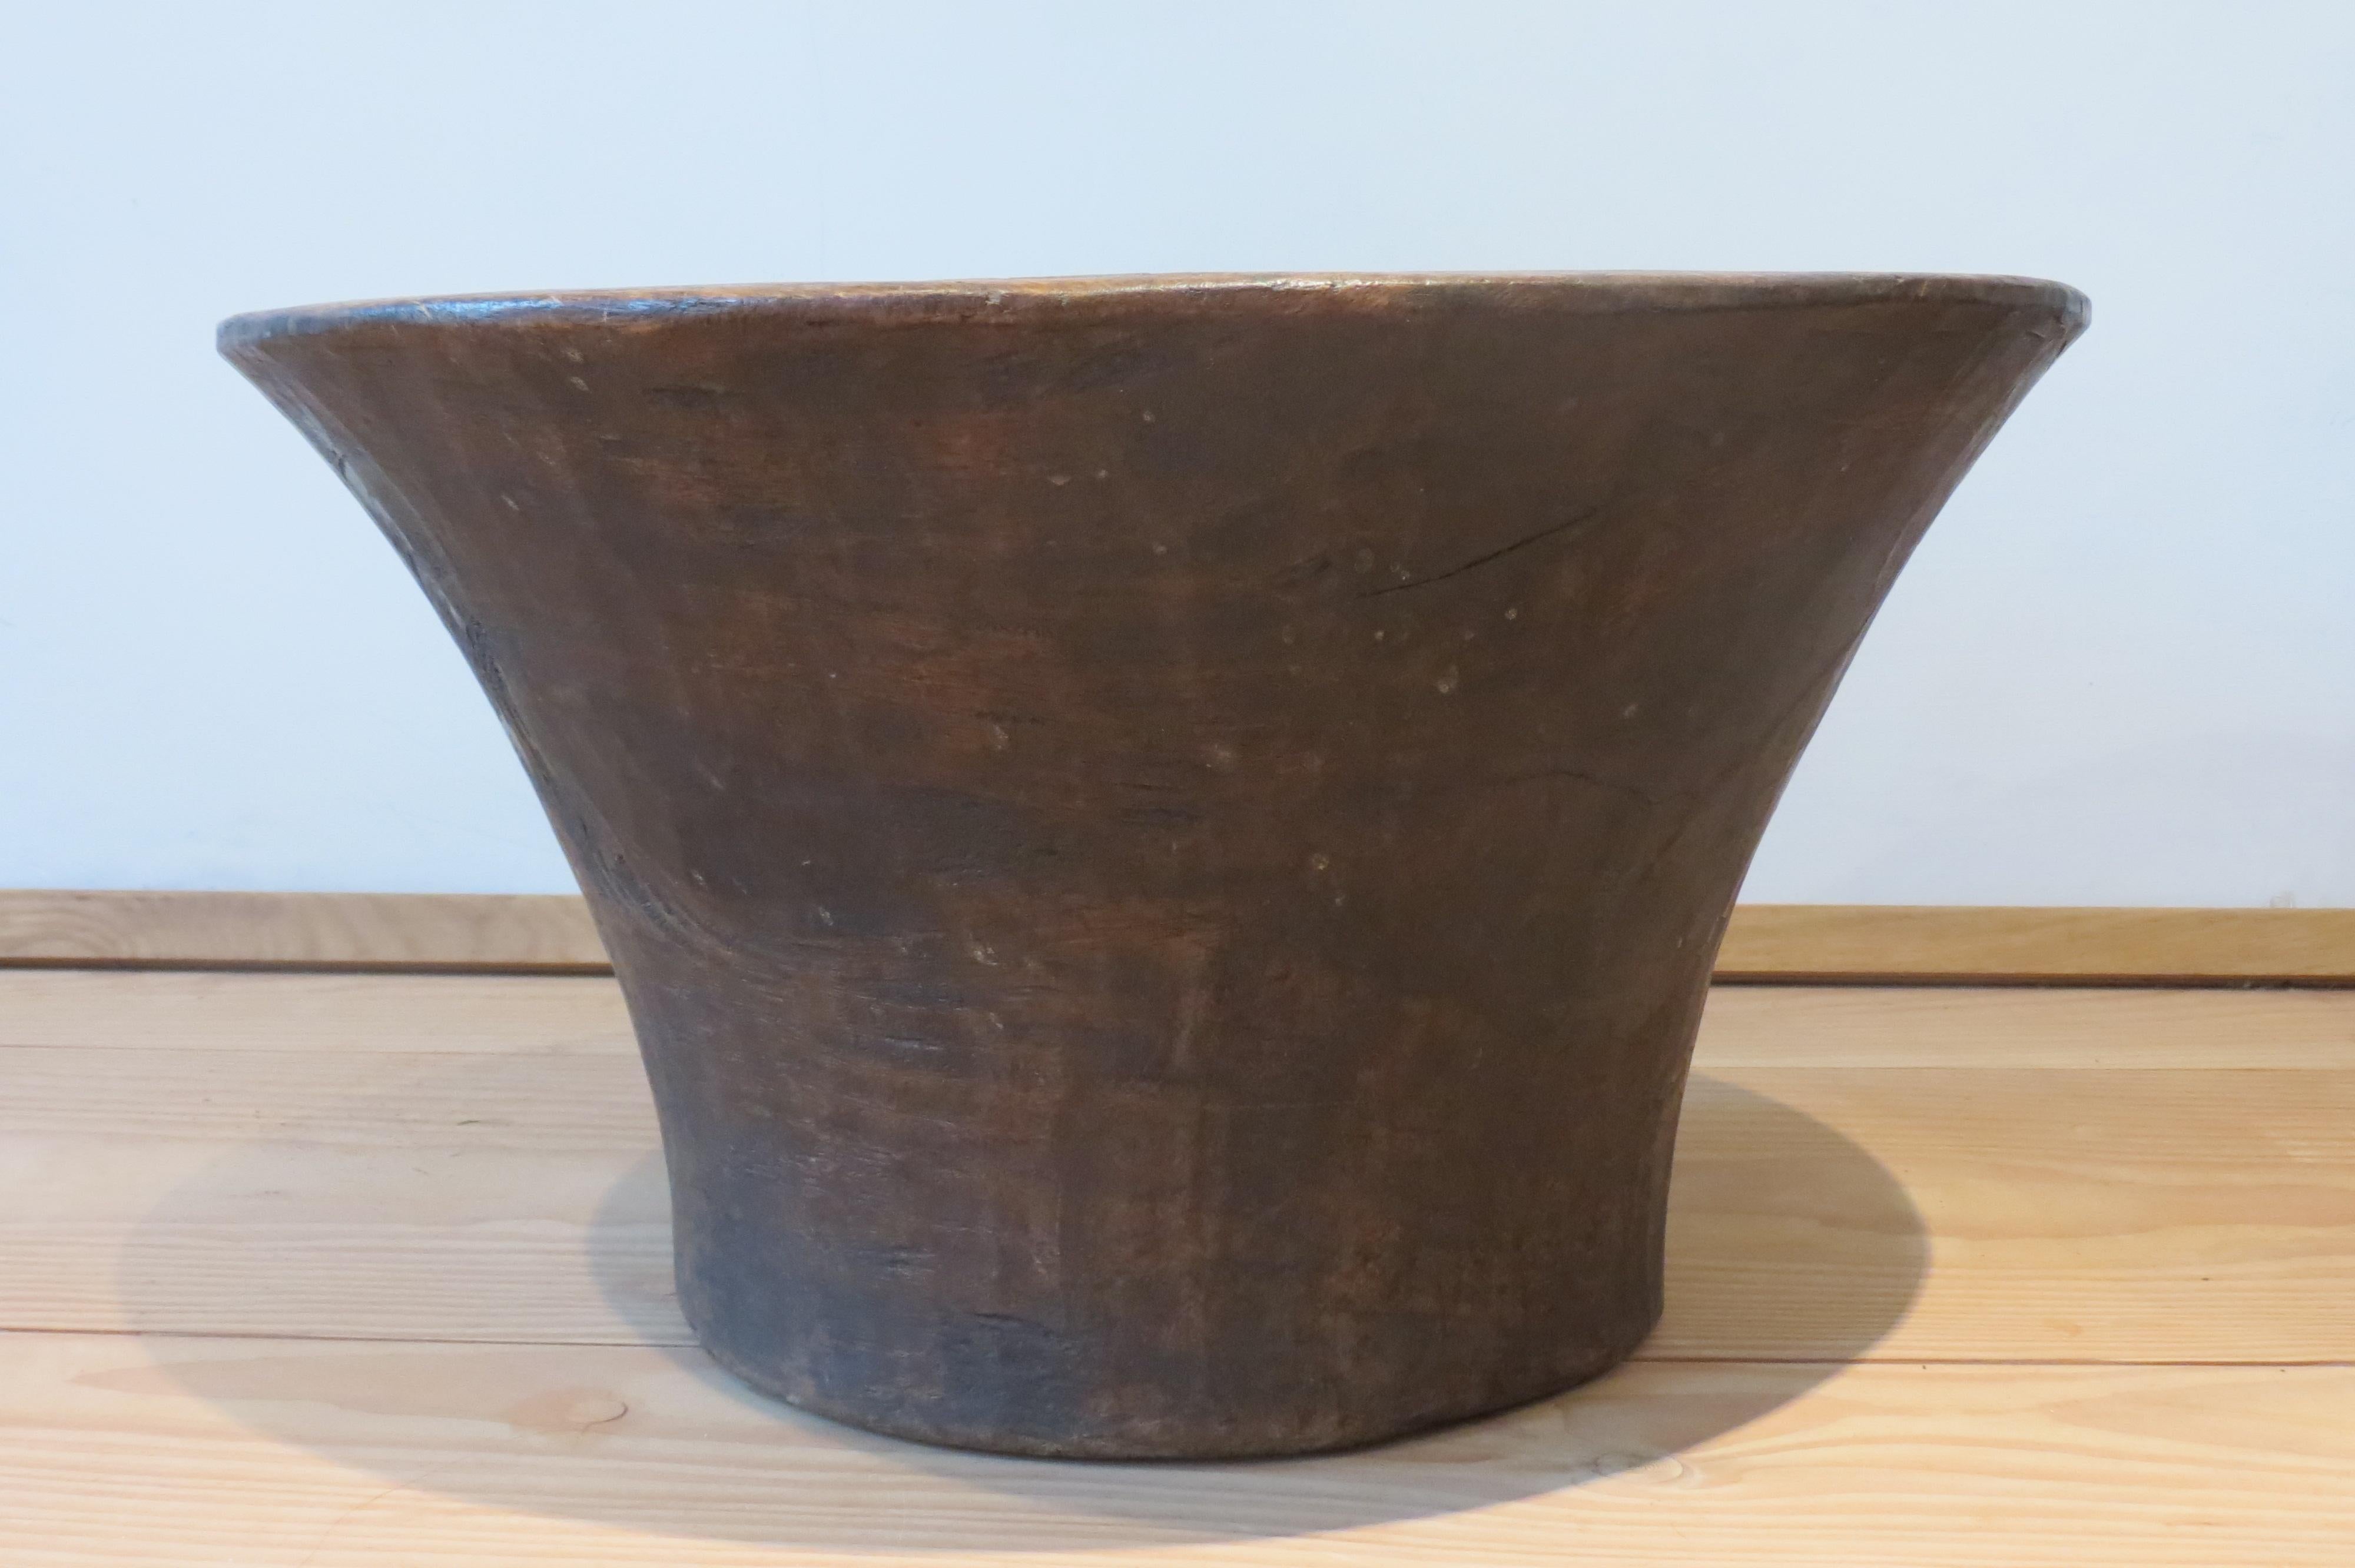 A very large African wooden bowl. Made from African hardwood and dates from the mid 20th Century. The piece has been hand crafted and shaped from a large piece of wood, and it retains signs of the hand shaping allowing the piece to patinate